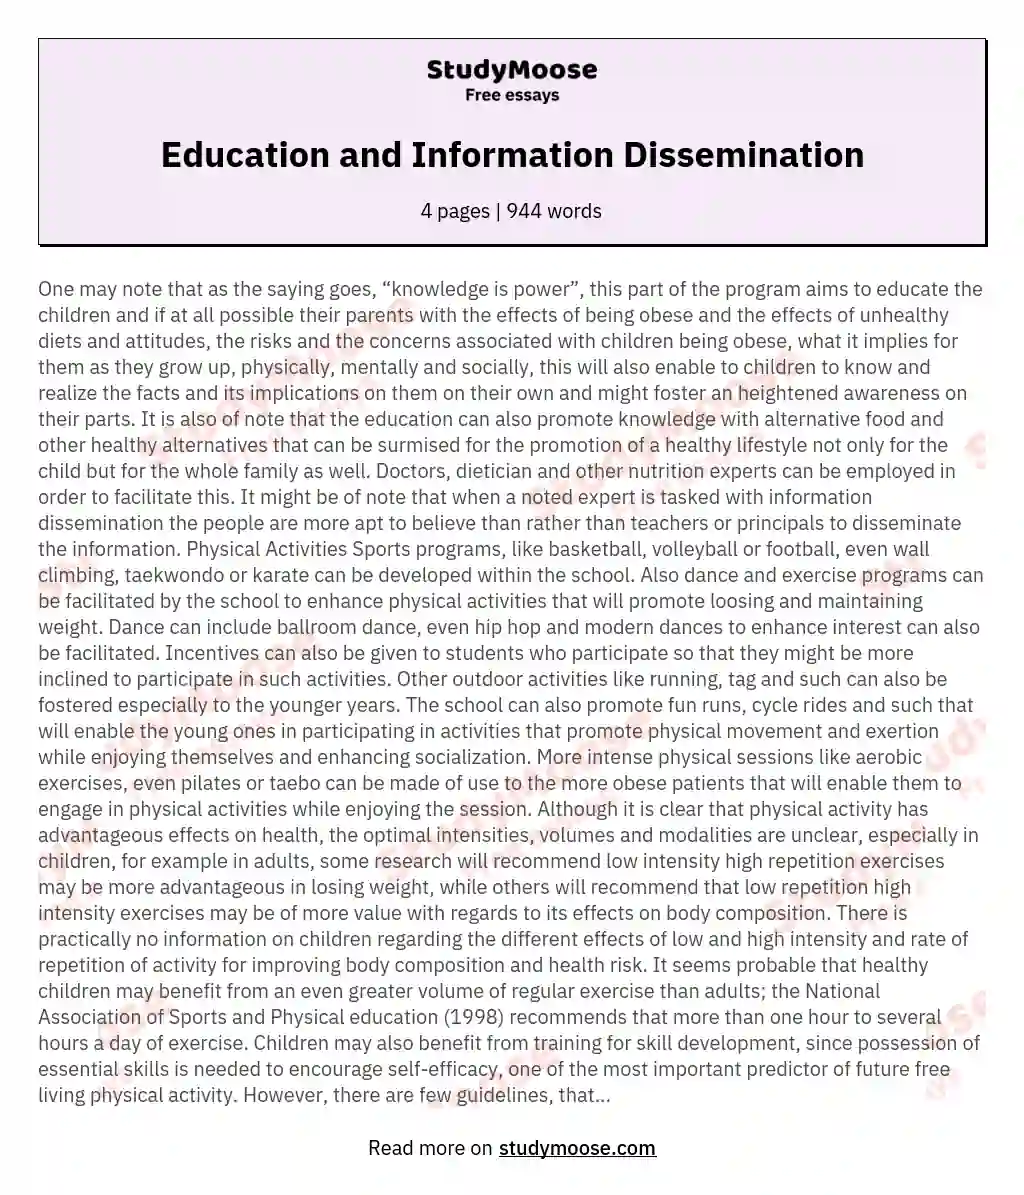 Education and Information Dissemination essay